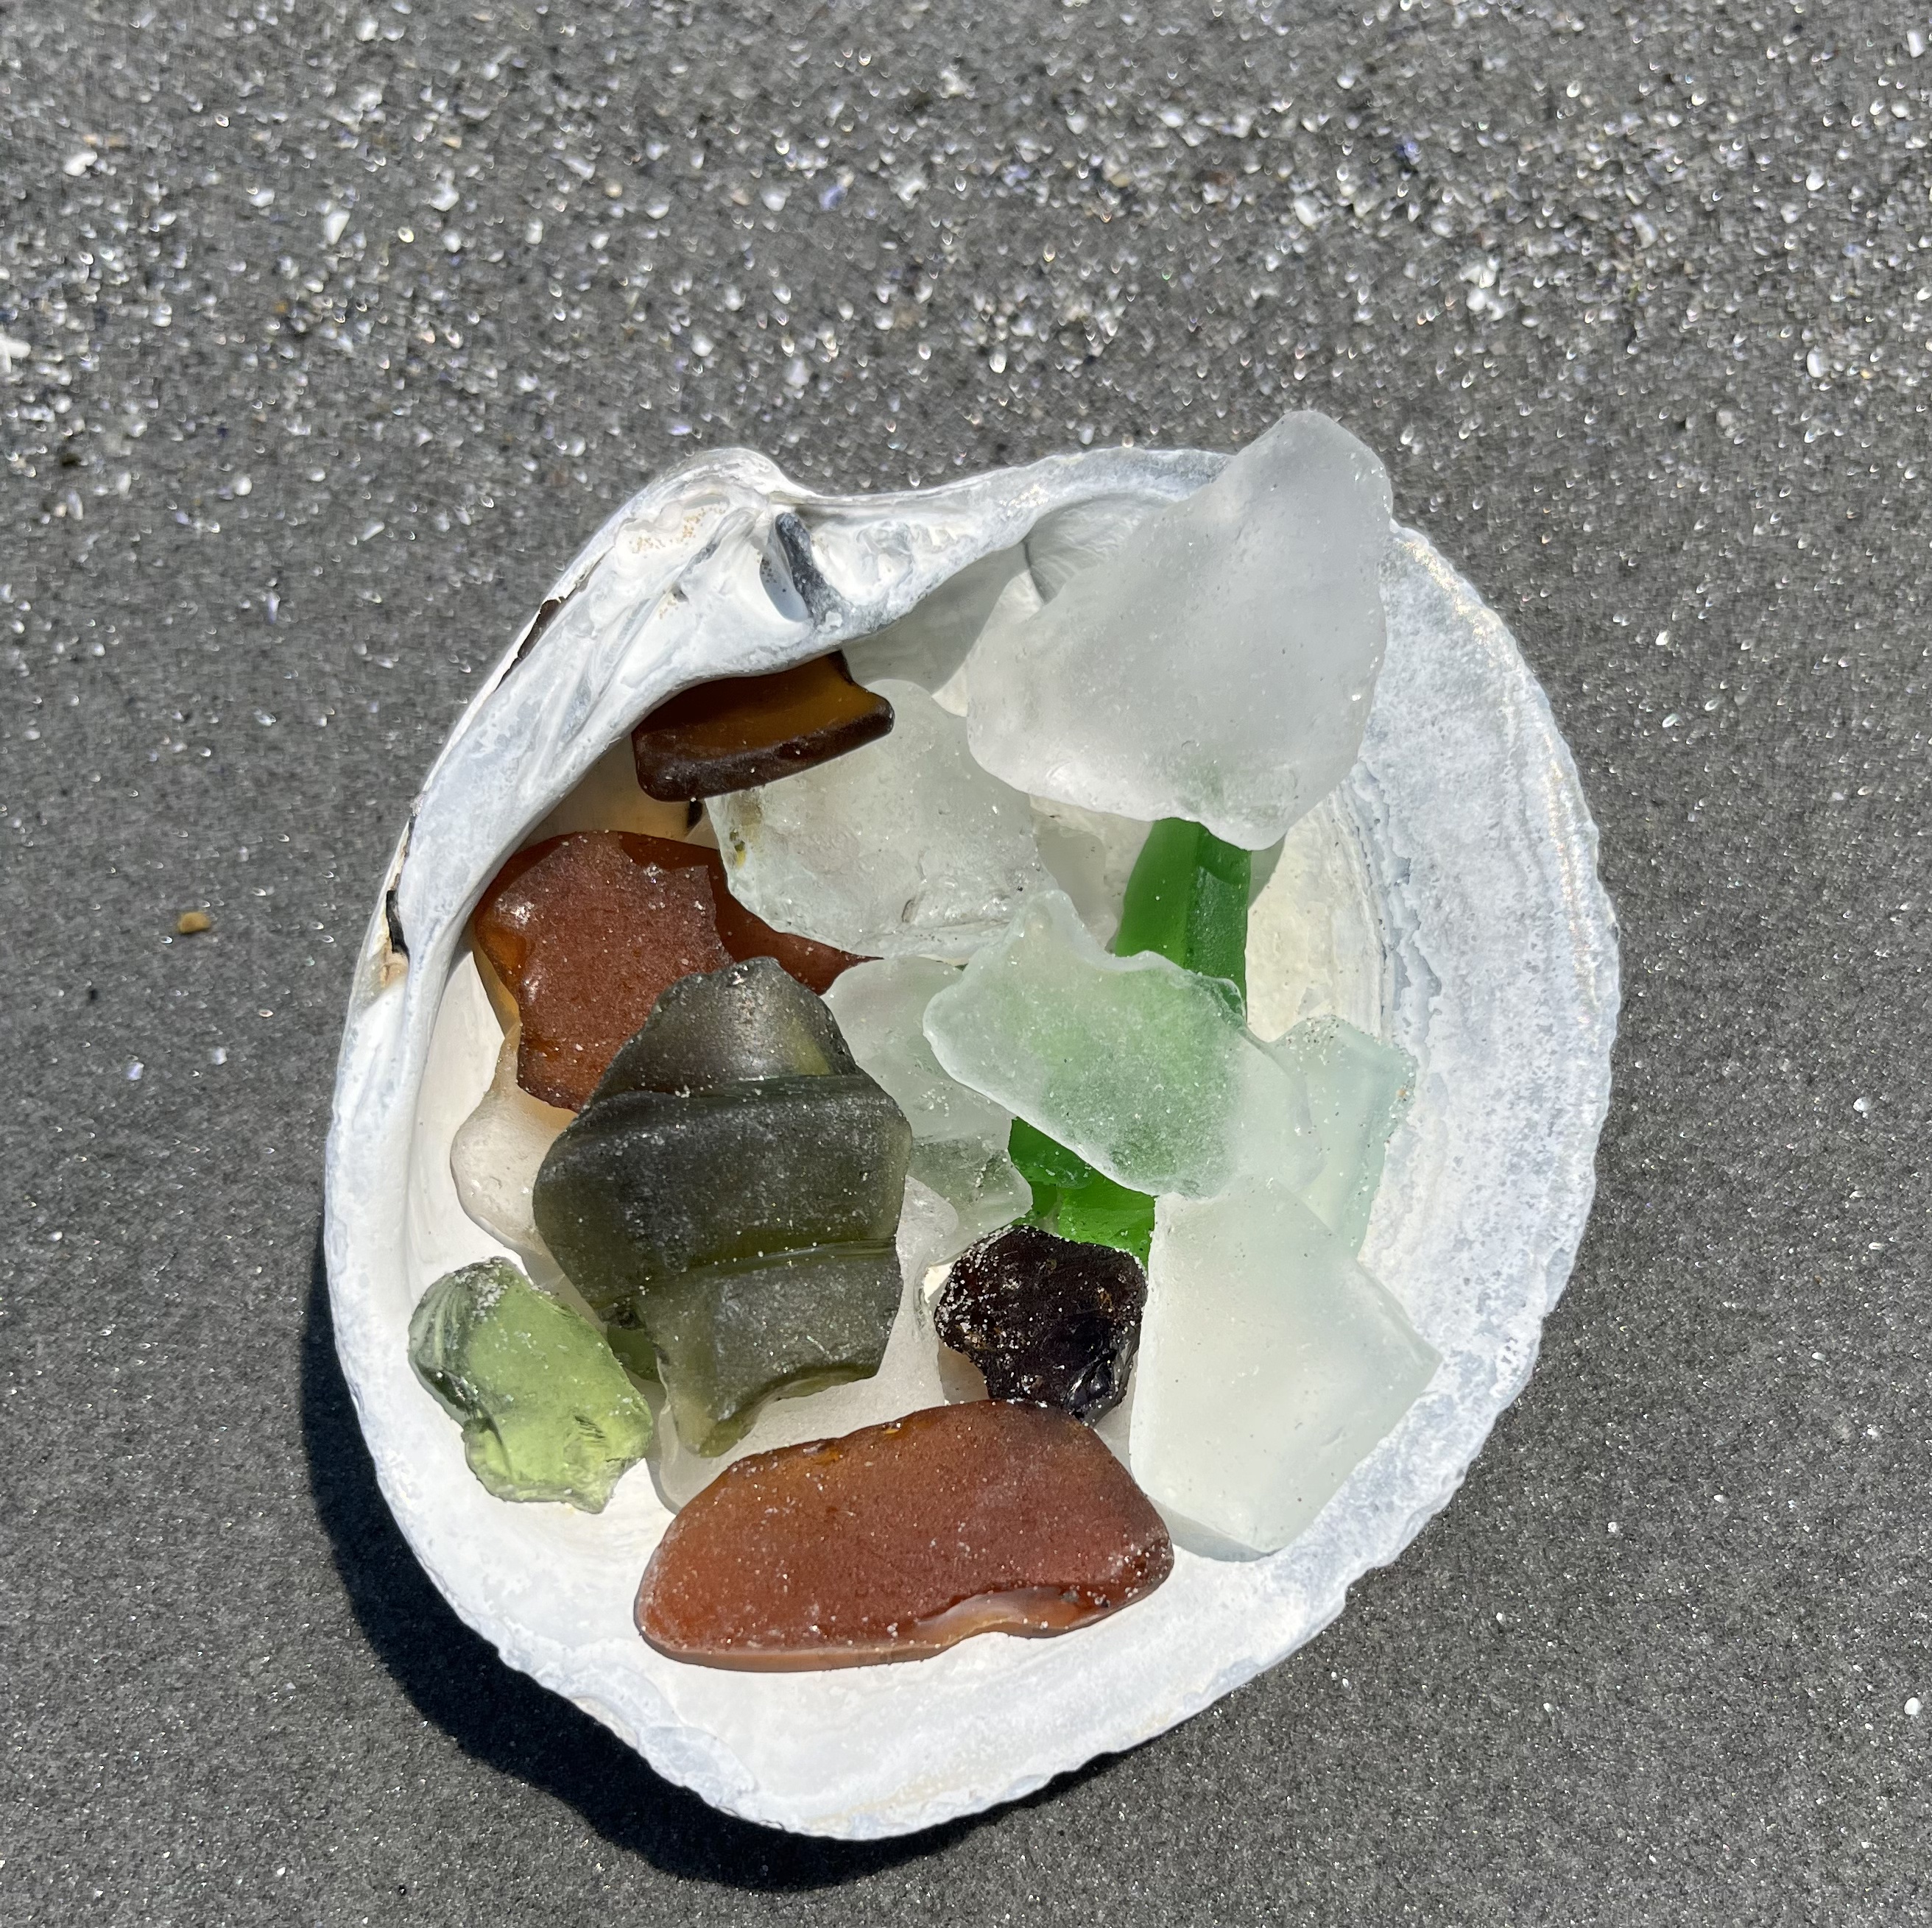 See the Sea Glass